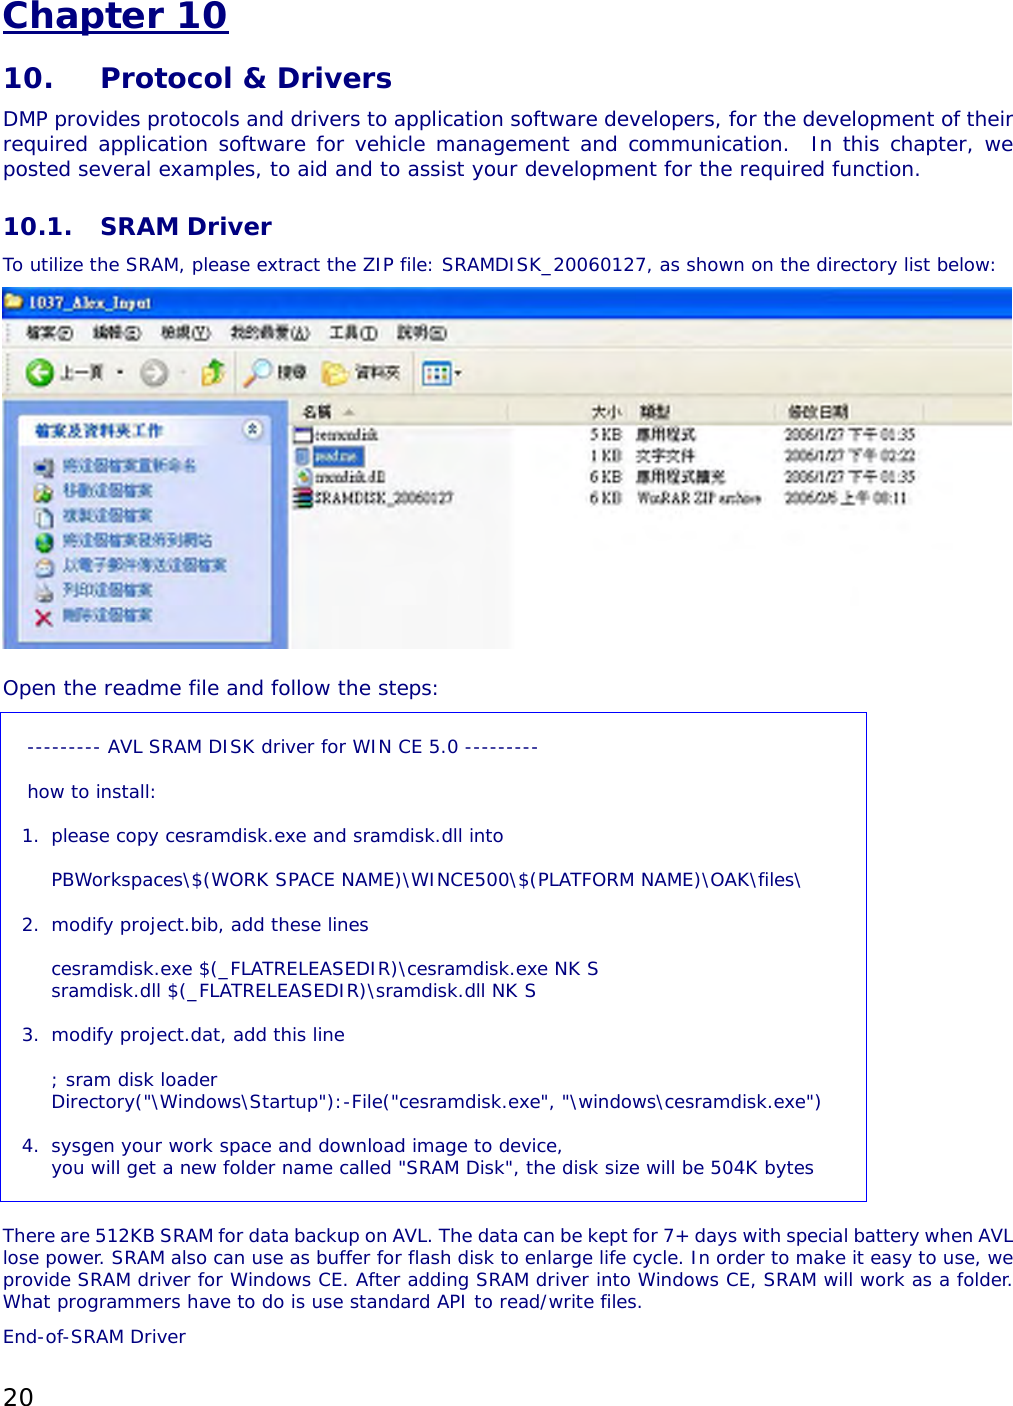 20 Chapter 10 10.  Protocol &amp; Drivers DMP provides protocols and drivers to application software developers, for the development of their required application software for vehicle management and communication.  In this chapter, we posted several examples, to aid and to assist your development for the required function.   10.1. SRAM Driver To utilize the SRAM, please extract the ZIP file: SRAMDISK_20060127, as shown on the directory list below:    Open the readme file and follow the steps:   --------- AVL SRAM DISK driver for WIN CE 5.0 ---------  how to install:  1.  please copy cesramdisk.exe and sramdisk.dll into    PBWorkspaces\$(WORK SPACE NAME)\WINCE500\$(PLATFORM NAME)\OAK\files\  2.  modify project.bib, add these lines  cesramdisk.exe $(_FLATRELEASEDIR)\cesramdisk.exe NK S sramdisk.dll $(_FLATRELEASEDIR)\sramdisk.dll NK S  3.  modify project.dat, add this line  ; sram disk loader Directory(&quot;\Windows\Startup&quot;):-File(&quot;cesramdisk.exe&quot;, &quot;\windows\cesramdisk.exe&quot;)  4.  sysgen your work space and download image to device, you will get a new folder name called &quot;SRAM Disk&quot;, the disk size will be 504K bytes      There are 512KB SRAM for data backup on AVL. The data can be kept for 7+ days with special battery when AVL lose power. SRAM also can use as buffer for flash disk to enlarge life cycle. In order to make it easy to use, we provide SRAM driver for Windows CE. After adding SRAM driver into Windows CE, SRAM will work as a folder. What programmers have to do is use standard API to read/write files.  End-of-SRAM Driver 